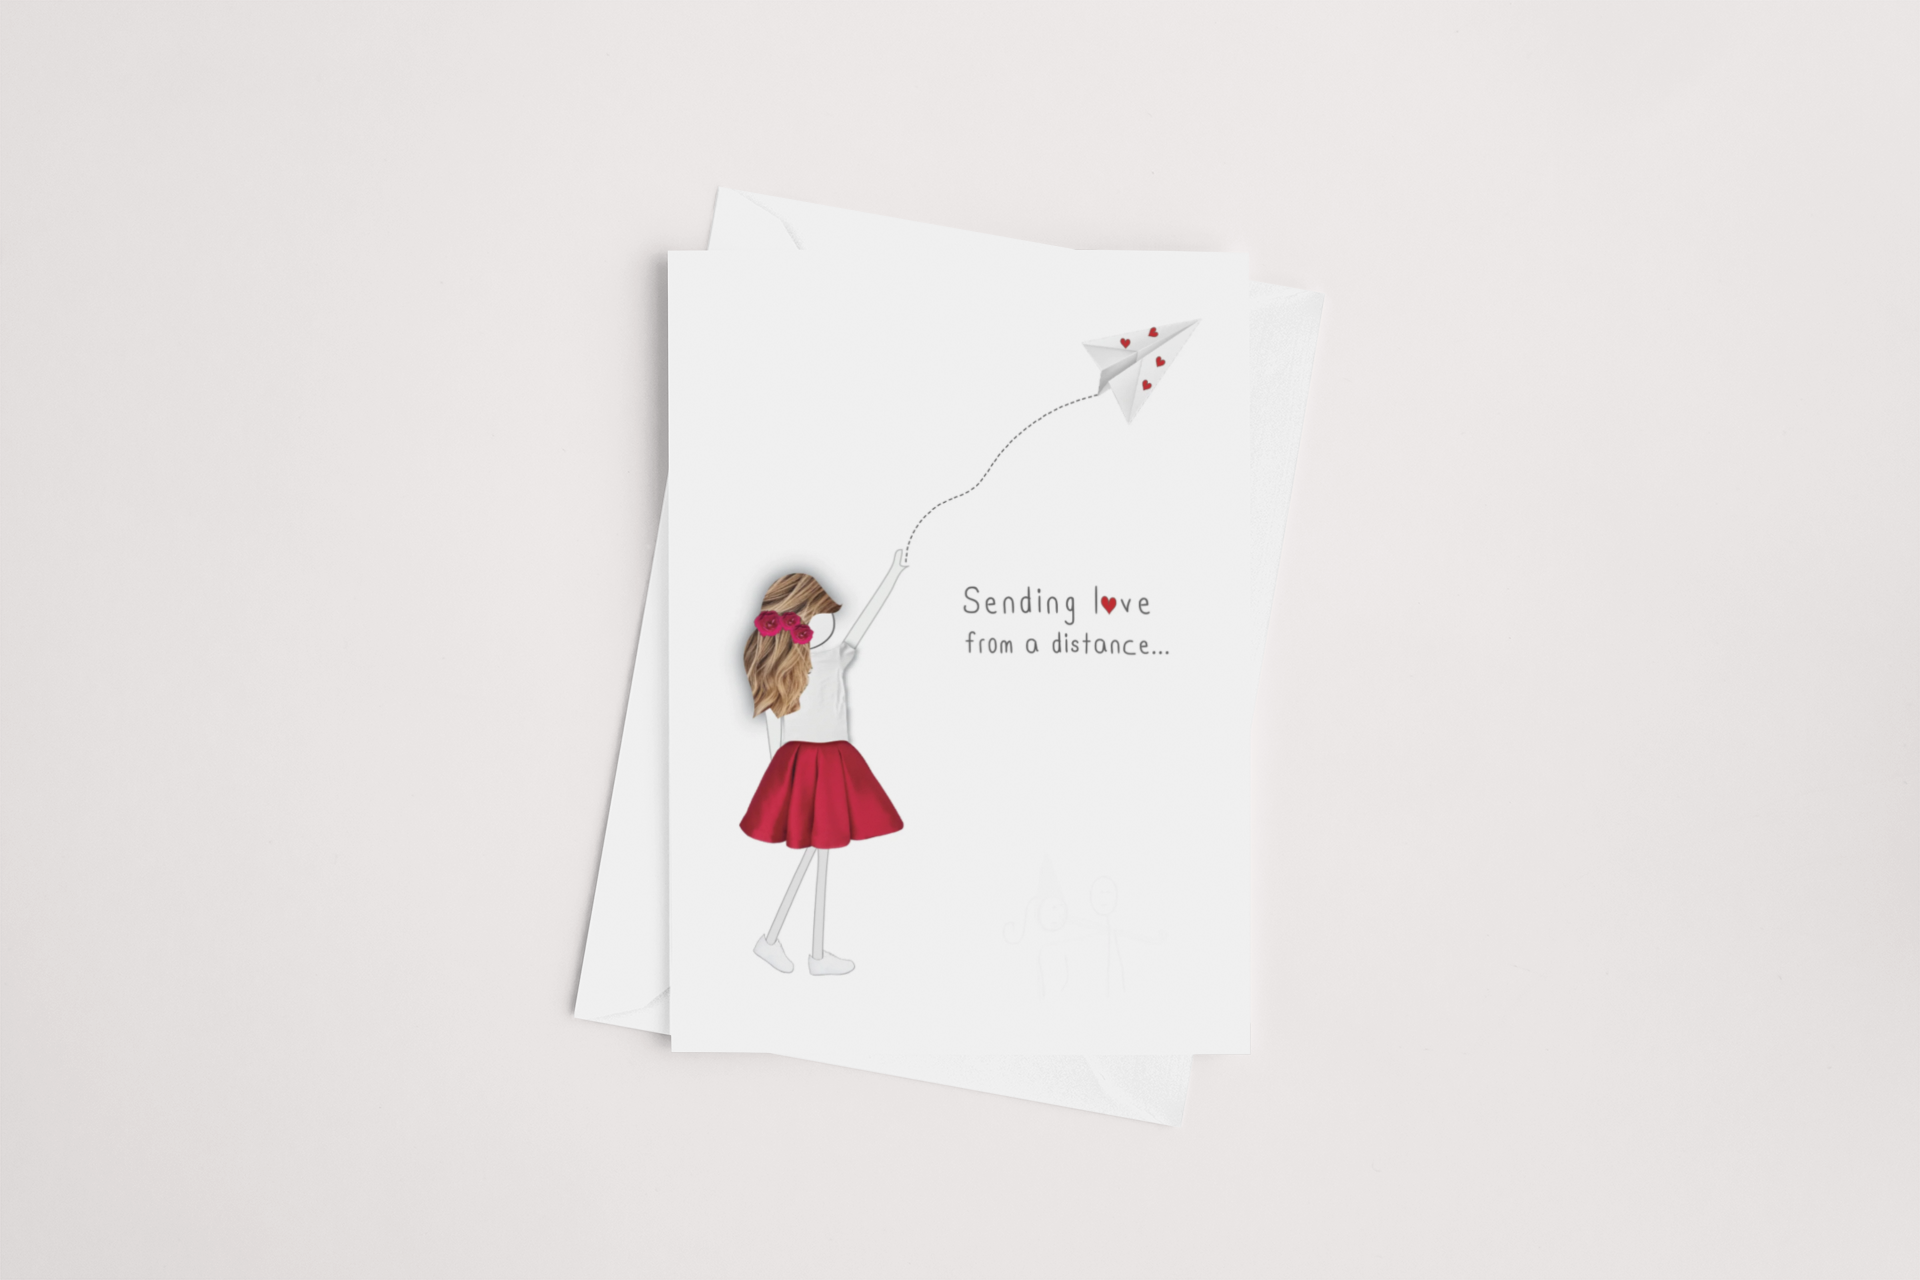 A heartfelt icandy Thinking of You Card with a whimsical illustration of a girl sending a paper plane, carrying the touching message "sending love from a distance..." on a clean white background.